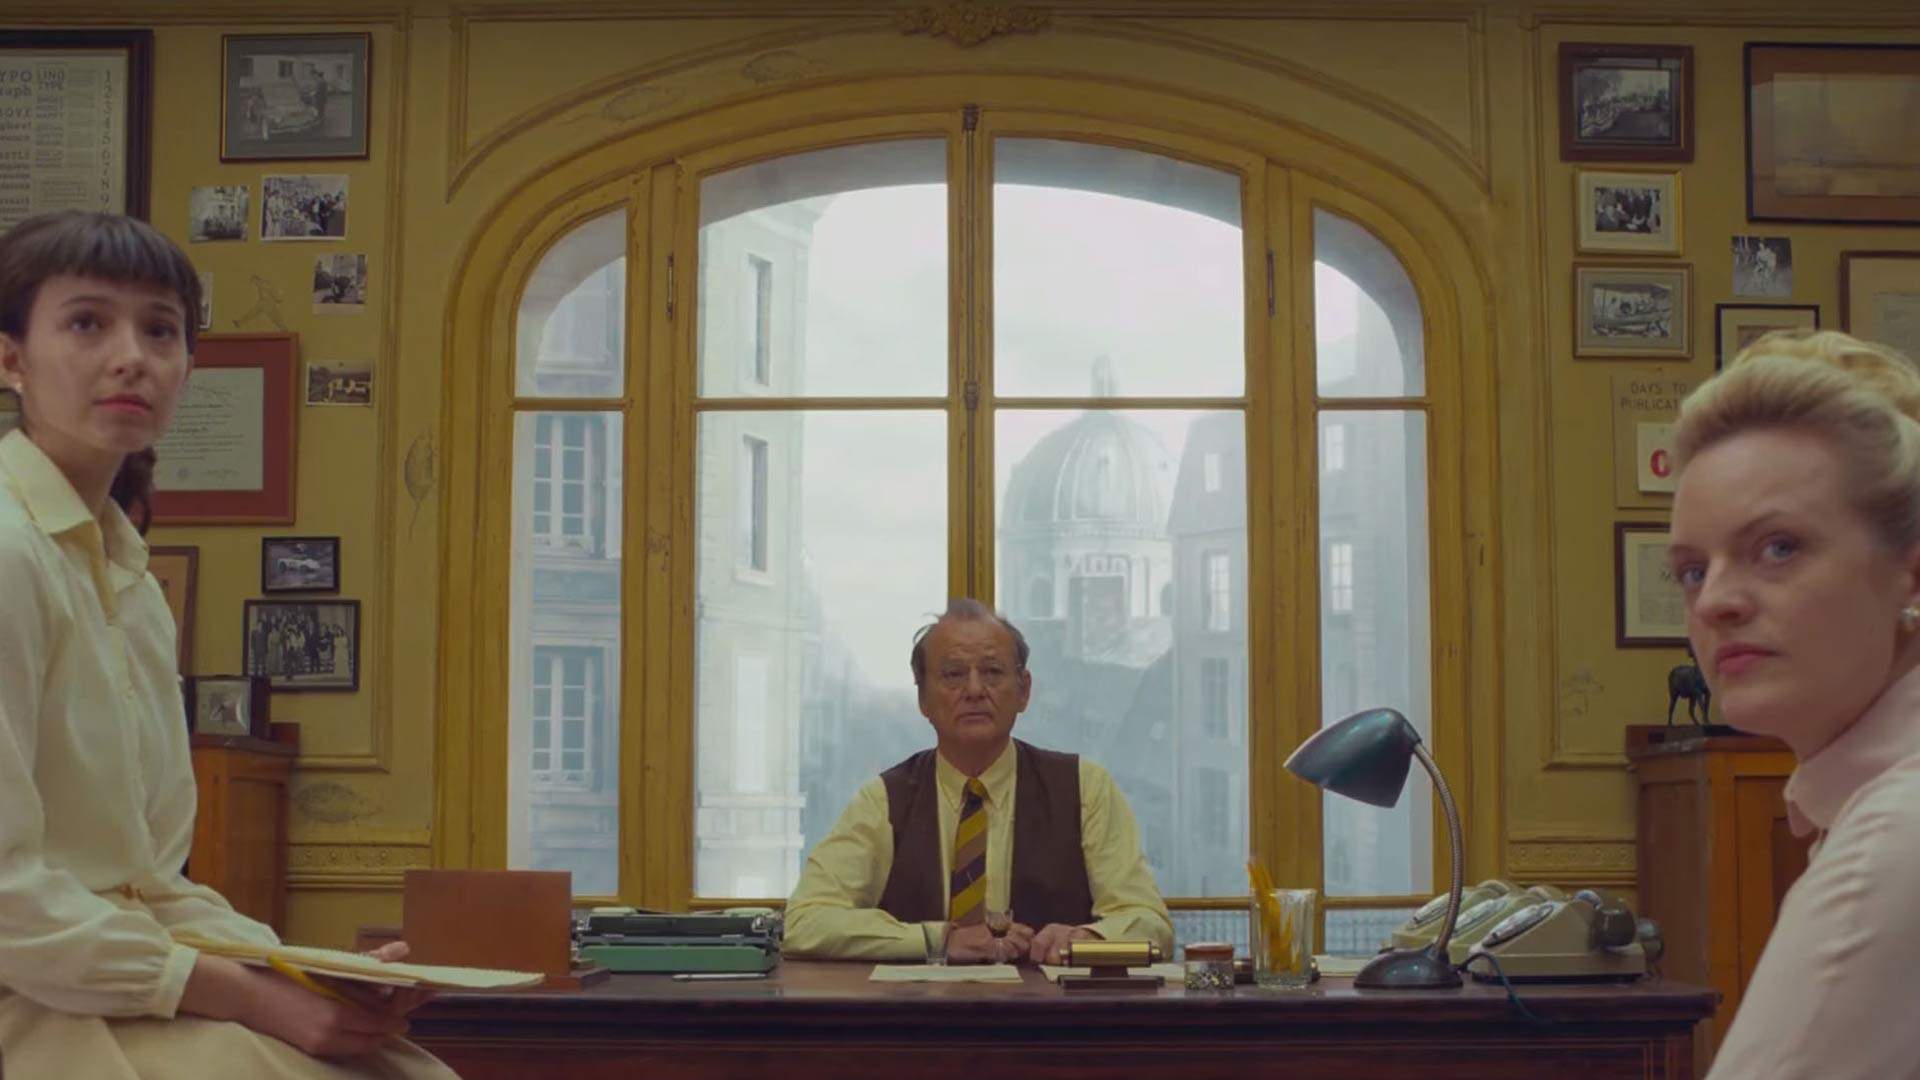 The First Trailer for Wes Anderson's 'The French Dispatch' Is Here and It's Very Wes Anderson